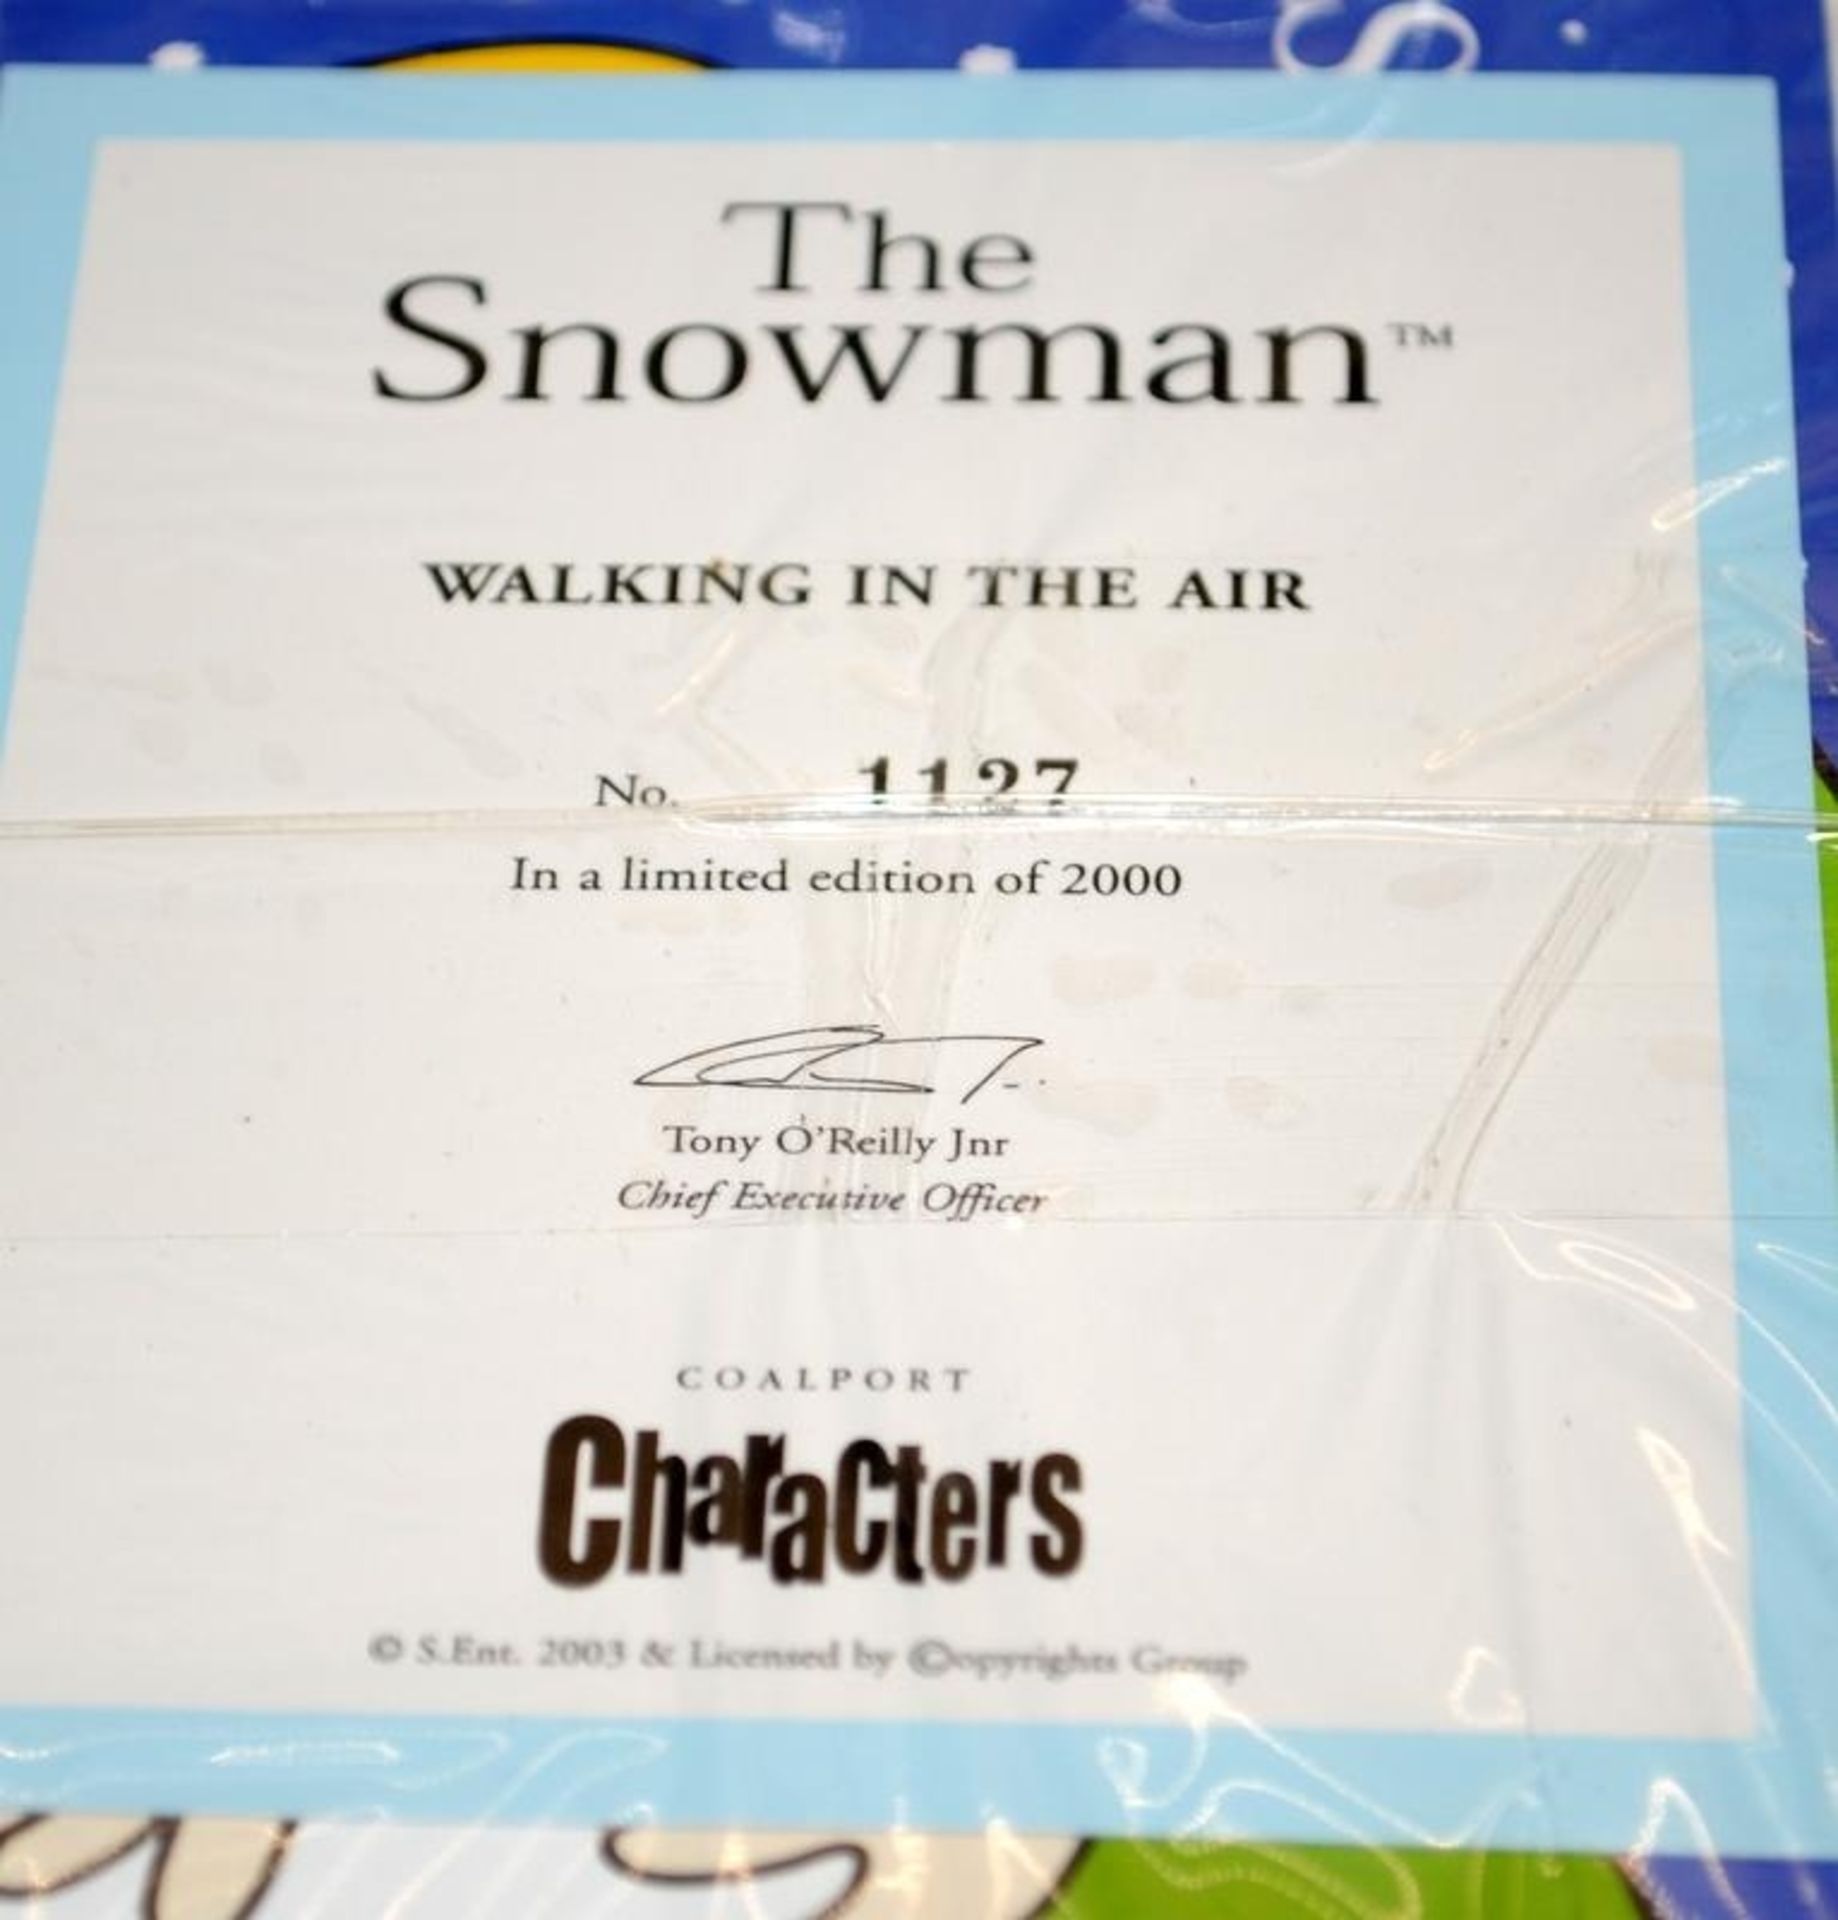 Coalport The Snowman Limited Edition Figurine: Walking In The Air, 1127/2000. Boxed with certificate - Image 3 of 4